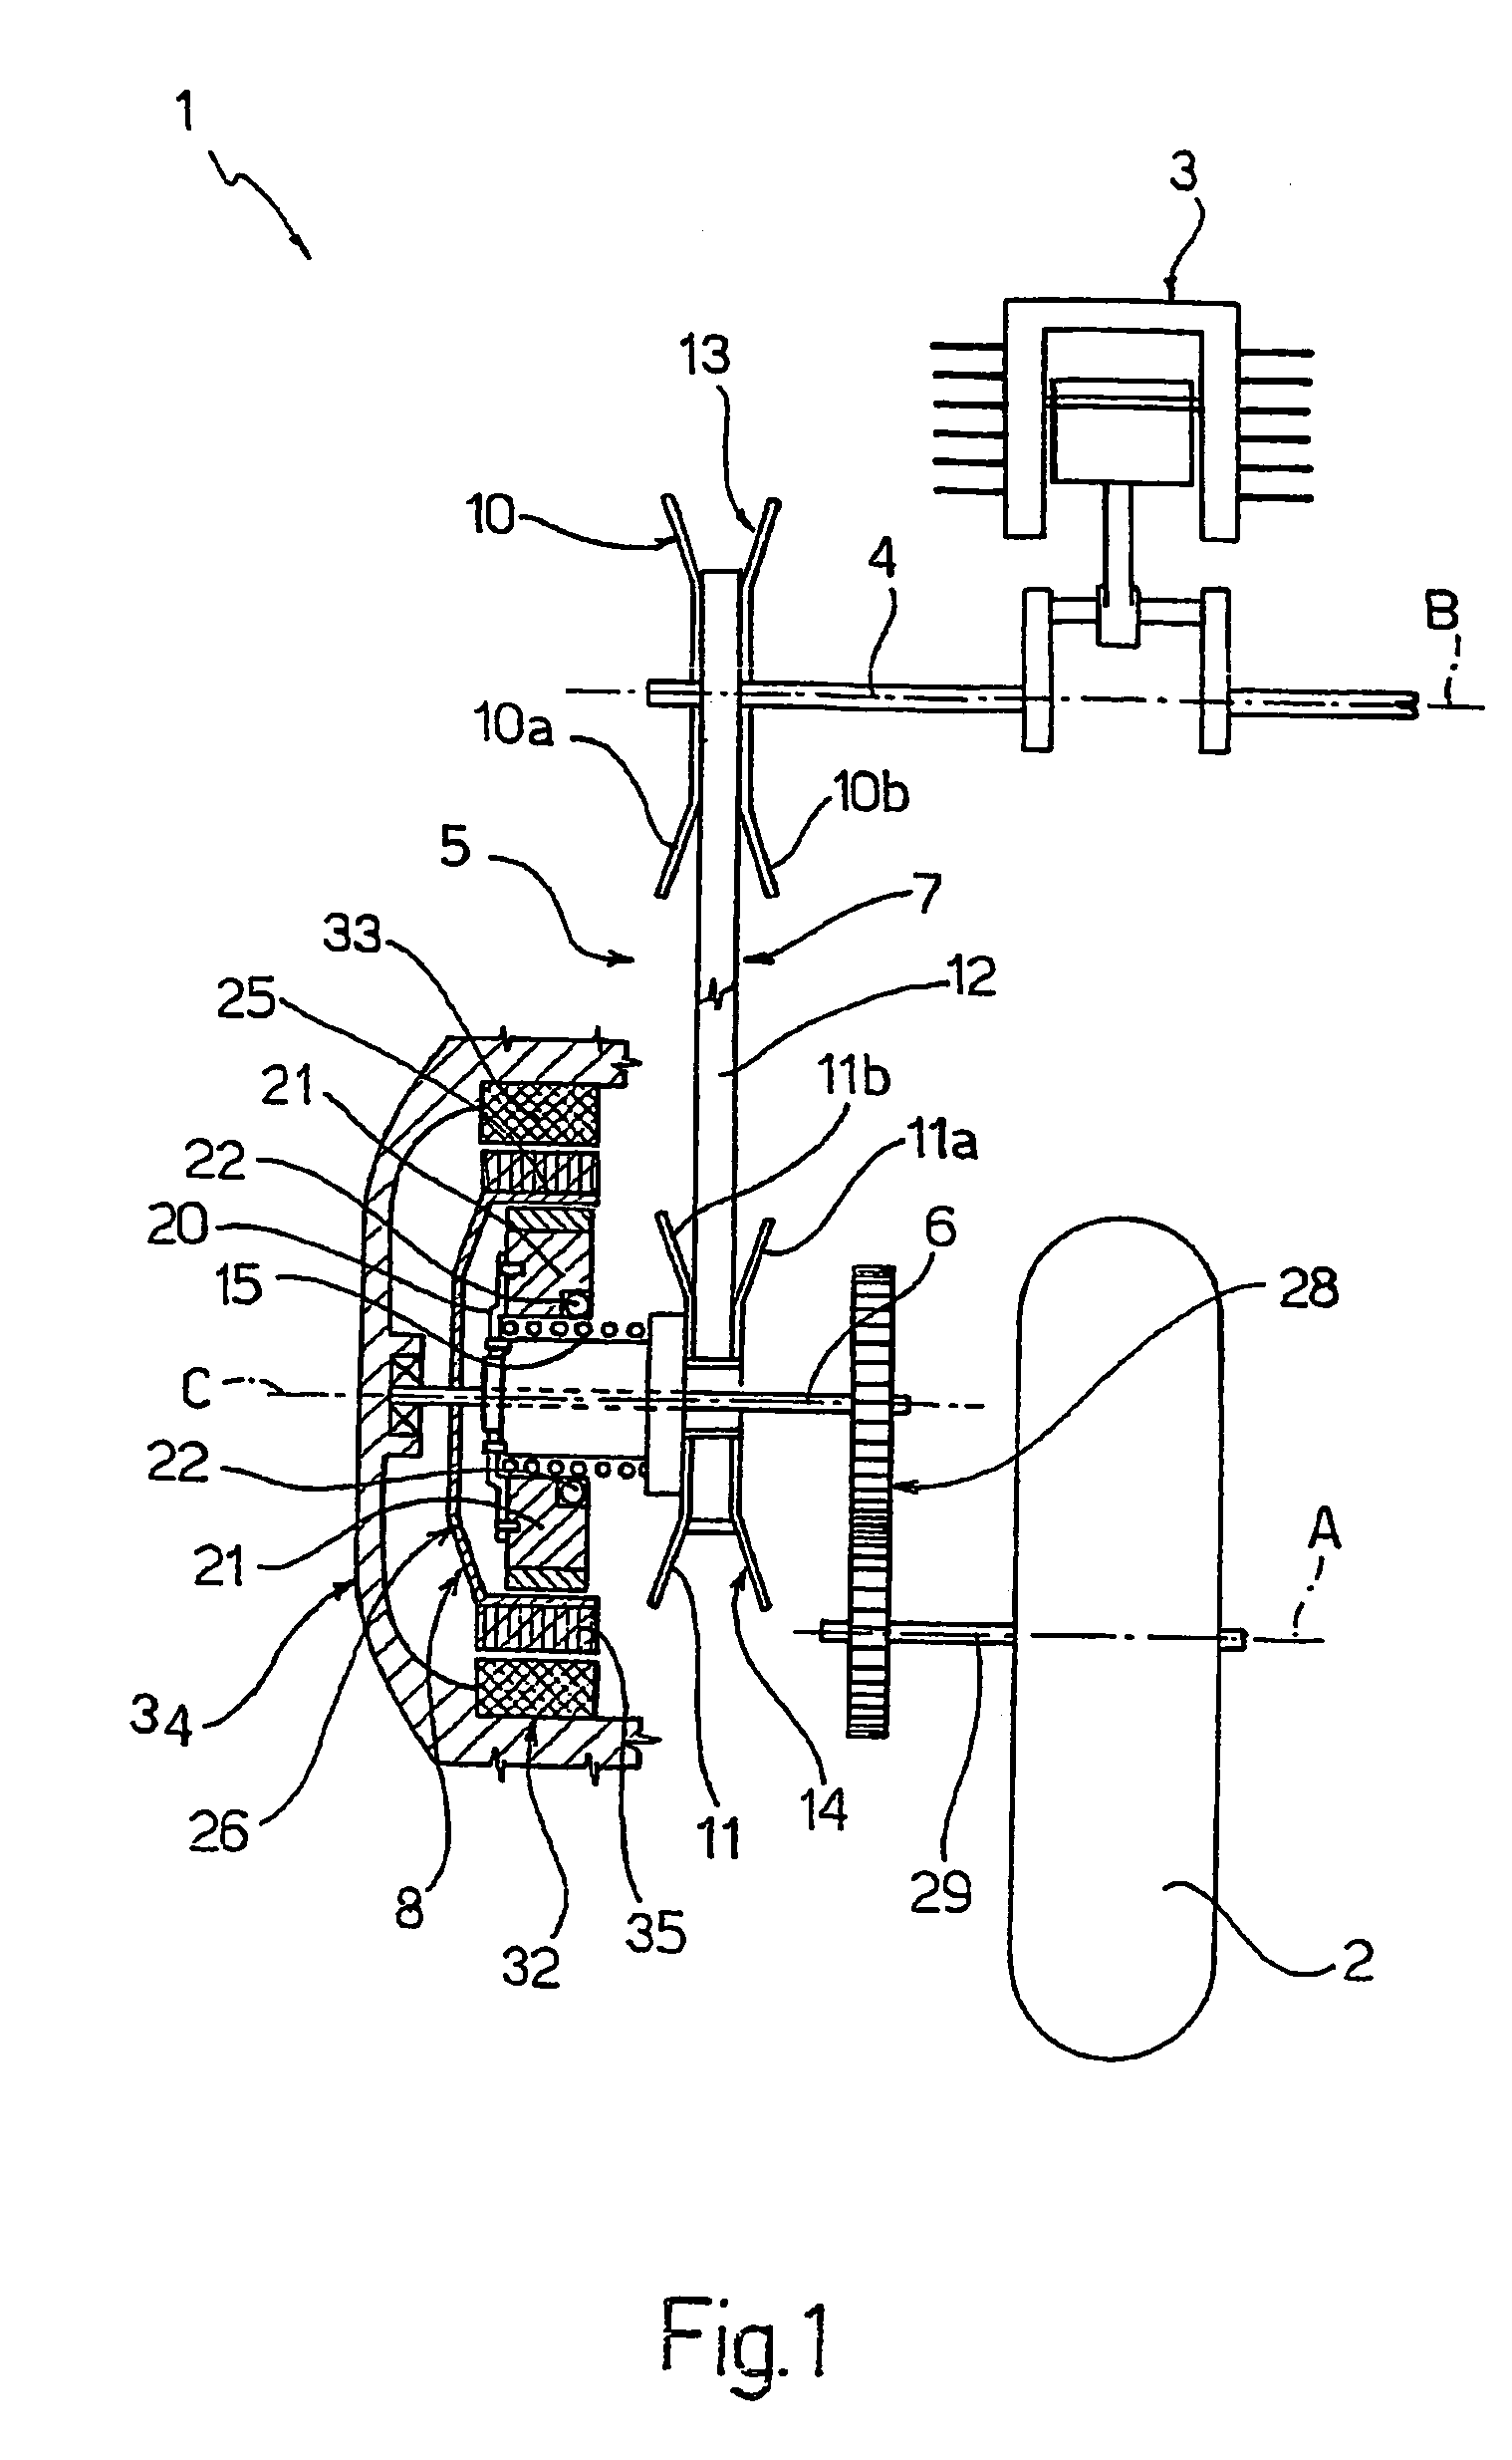 Hybrid drive assembly for a vehicle, in particular a scooter